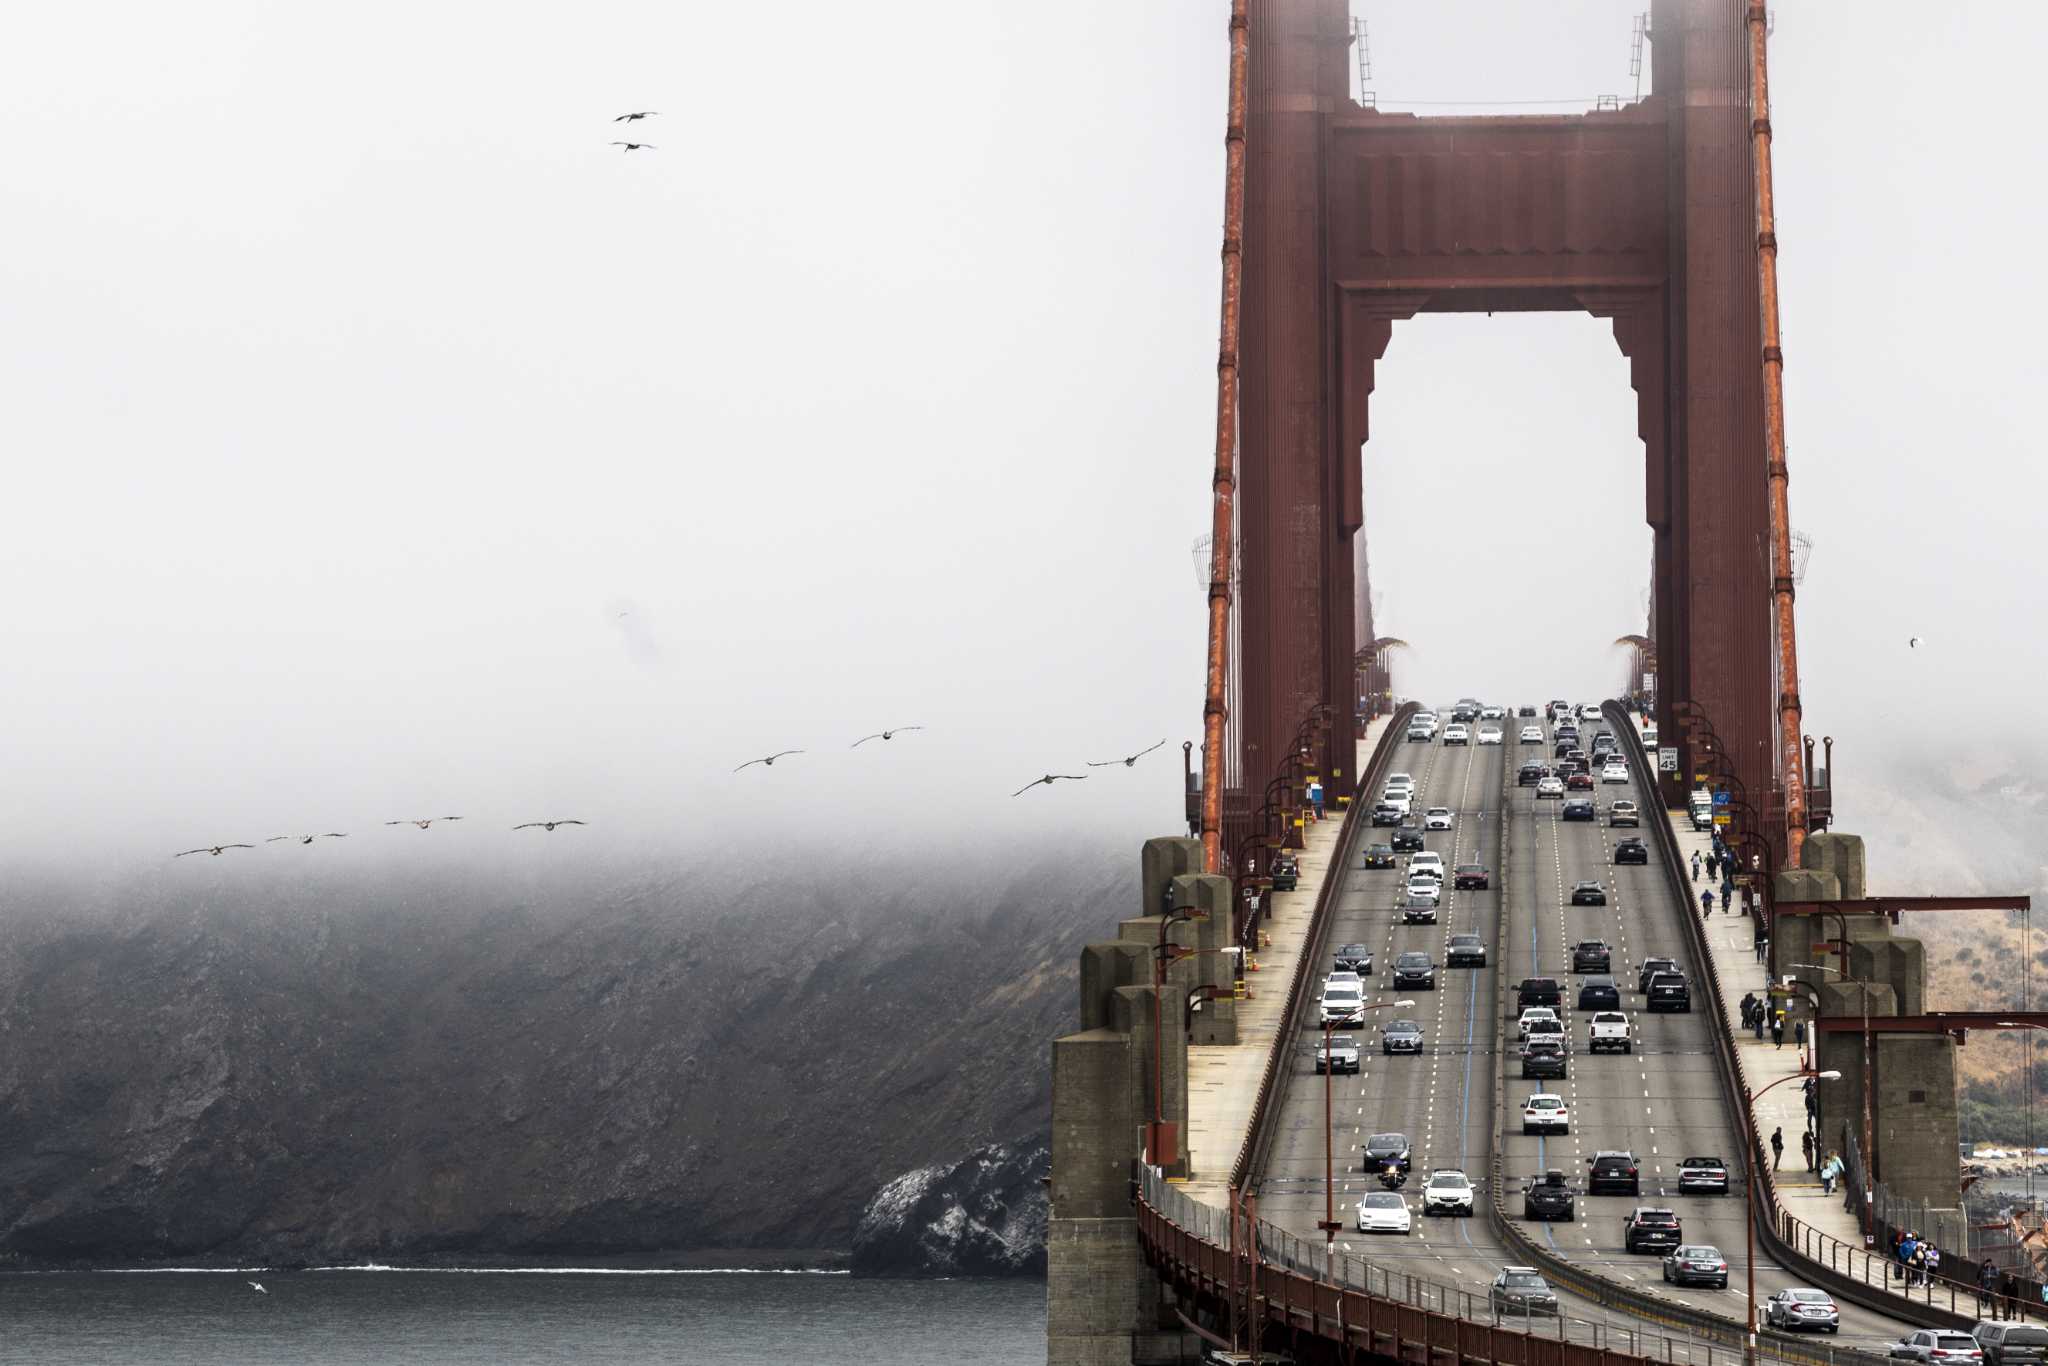 Golden Gate Bridge has fewer cars crossing, 'fiscal cliff' looms